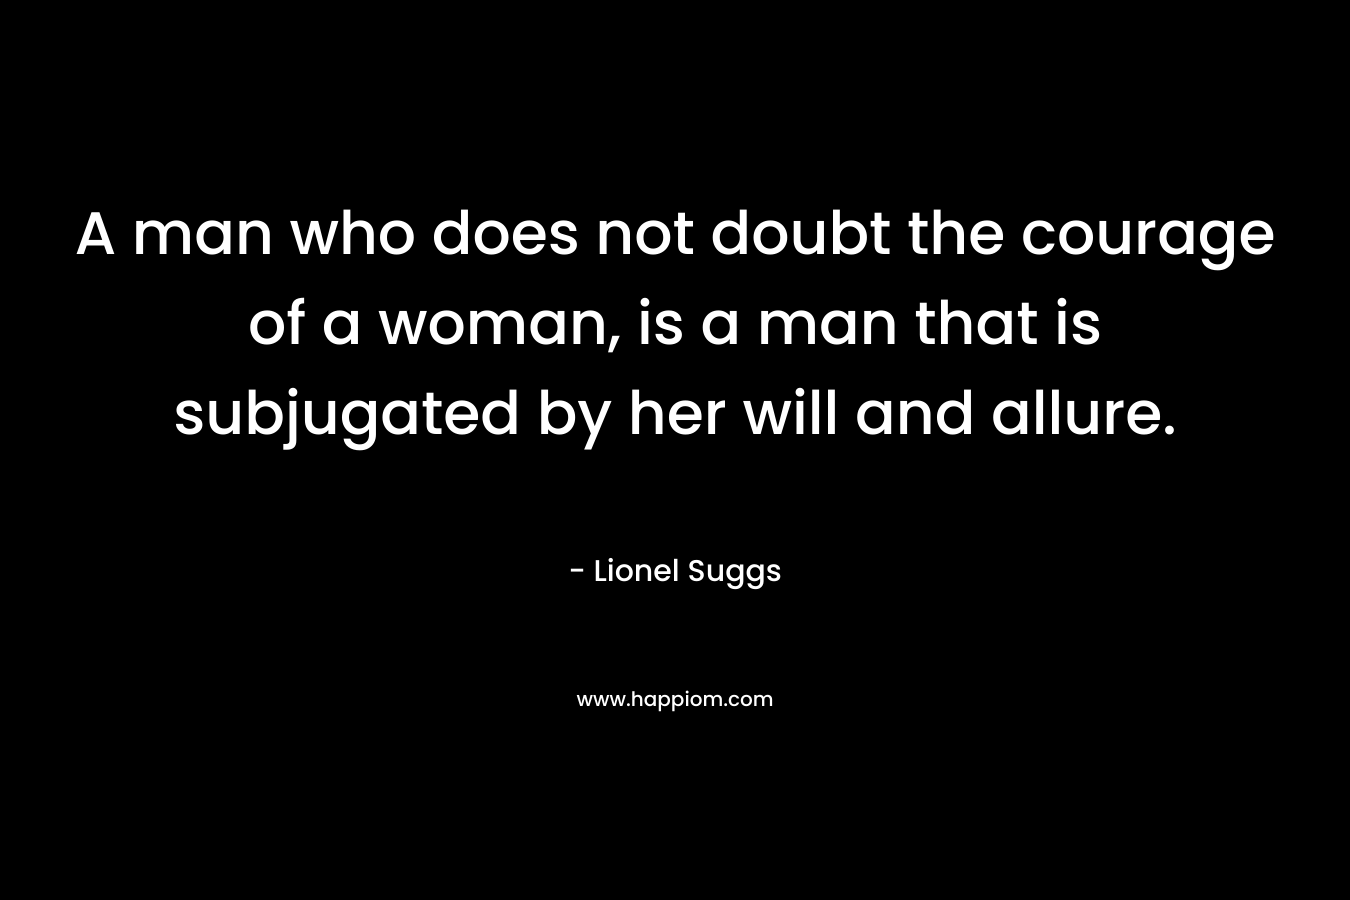 A man who does not doubt the courage of a woman, is a man that is subjugated by her will and allure.